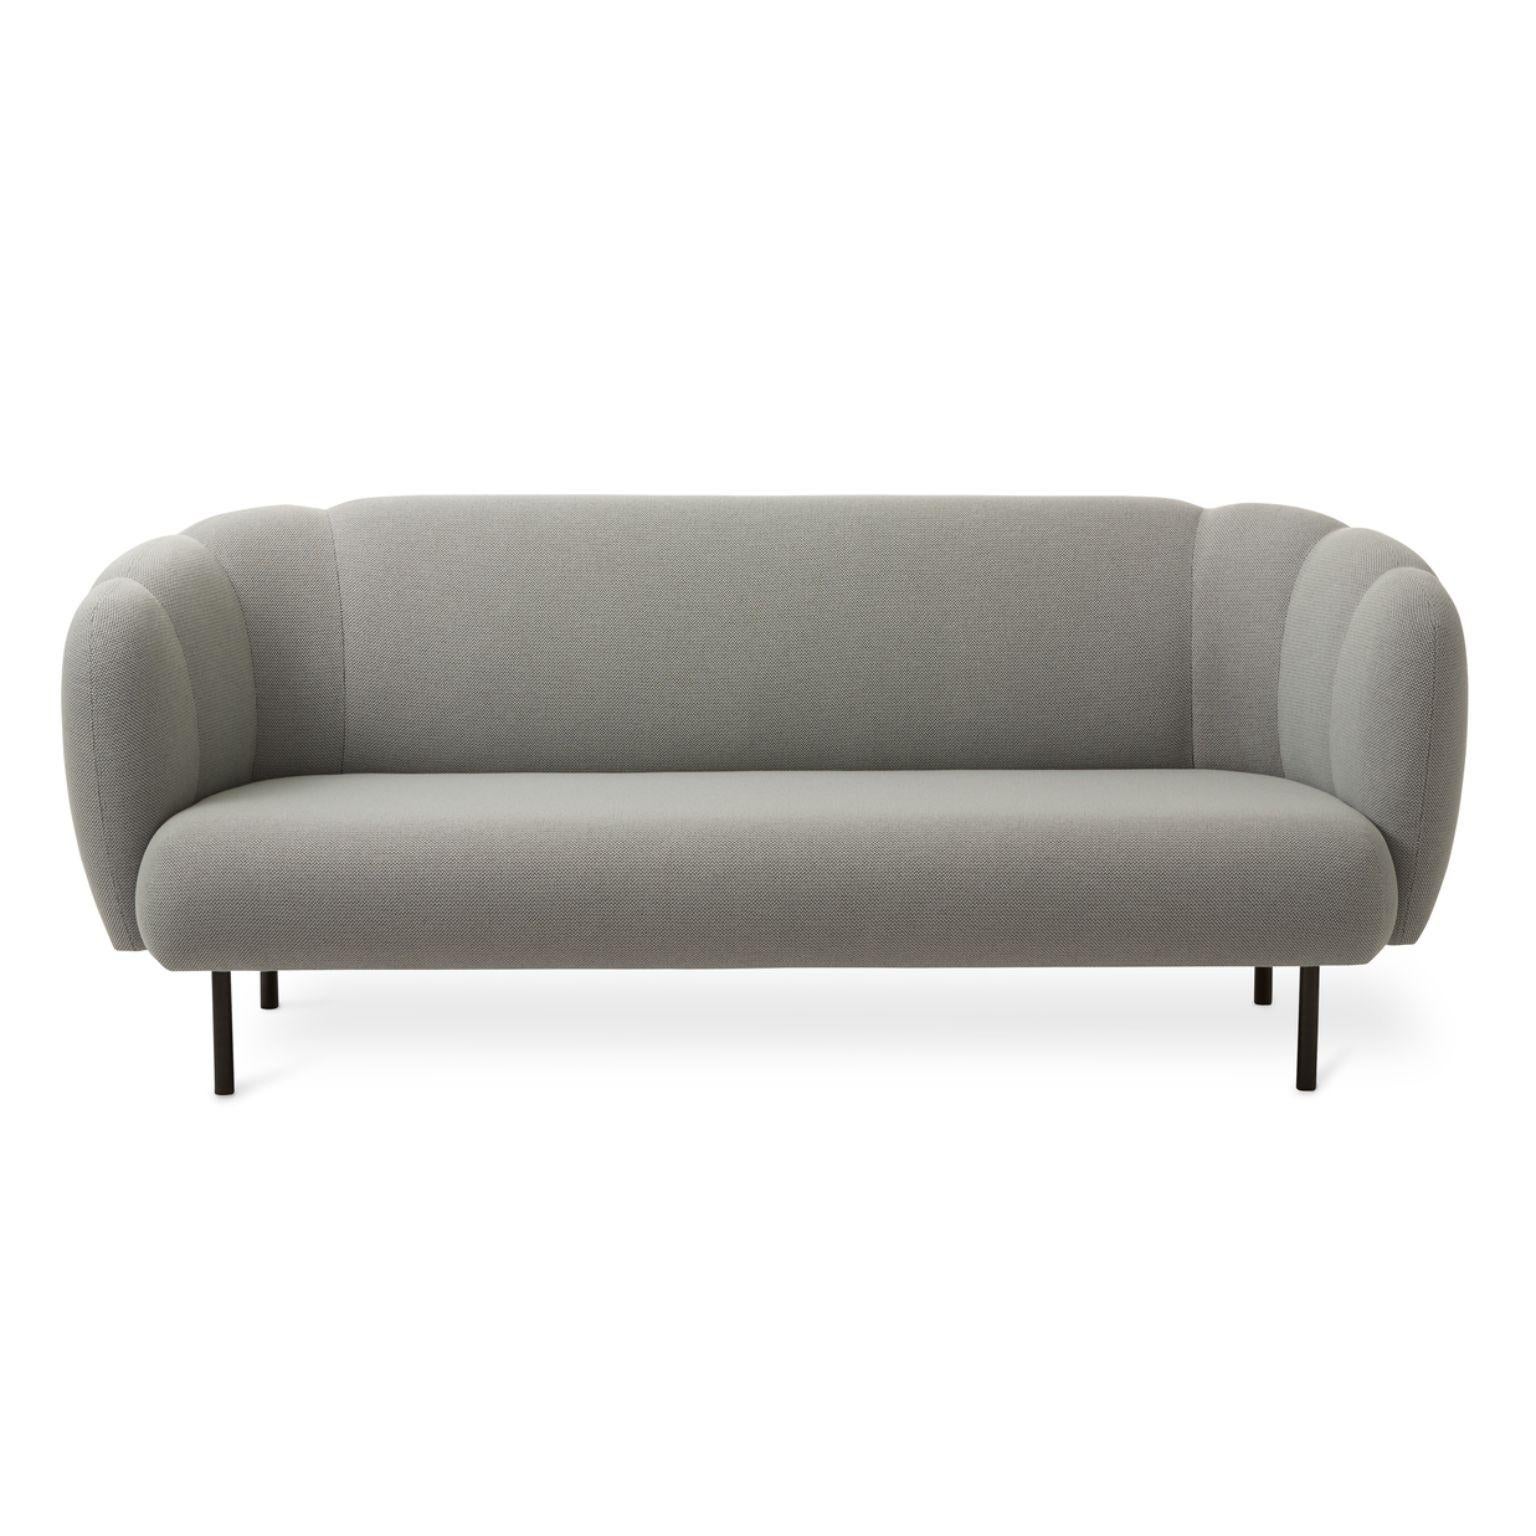 Caper 3 seater with stitches minty grey by Warm Nordic
Dimensions: D 200 x W 84 x H 80 cm
Material: Textile upholstery, Wooden frame, Powder coated black steel legs.
Weight: 55.5 kg
Also available in different colours and finishes.

An elegant